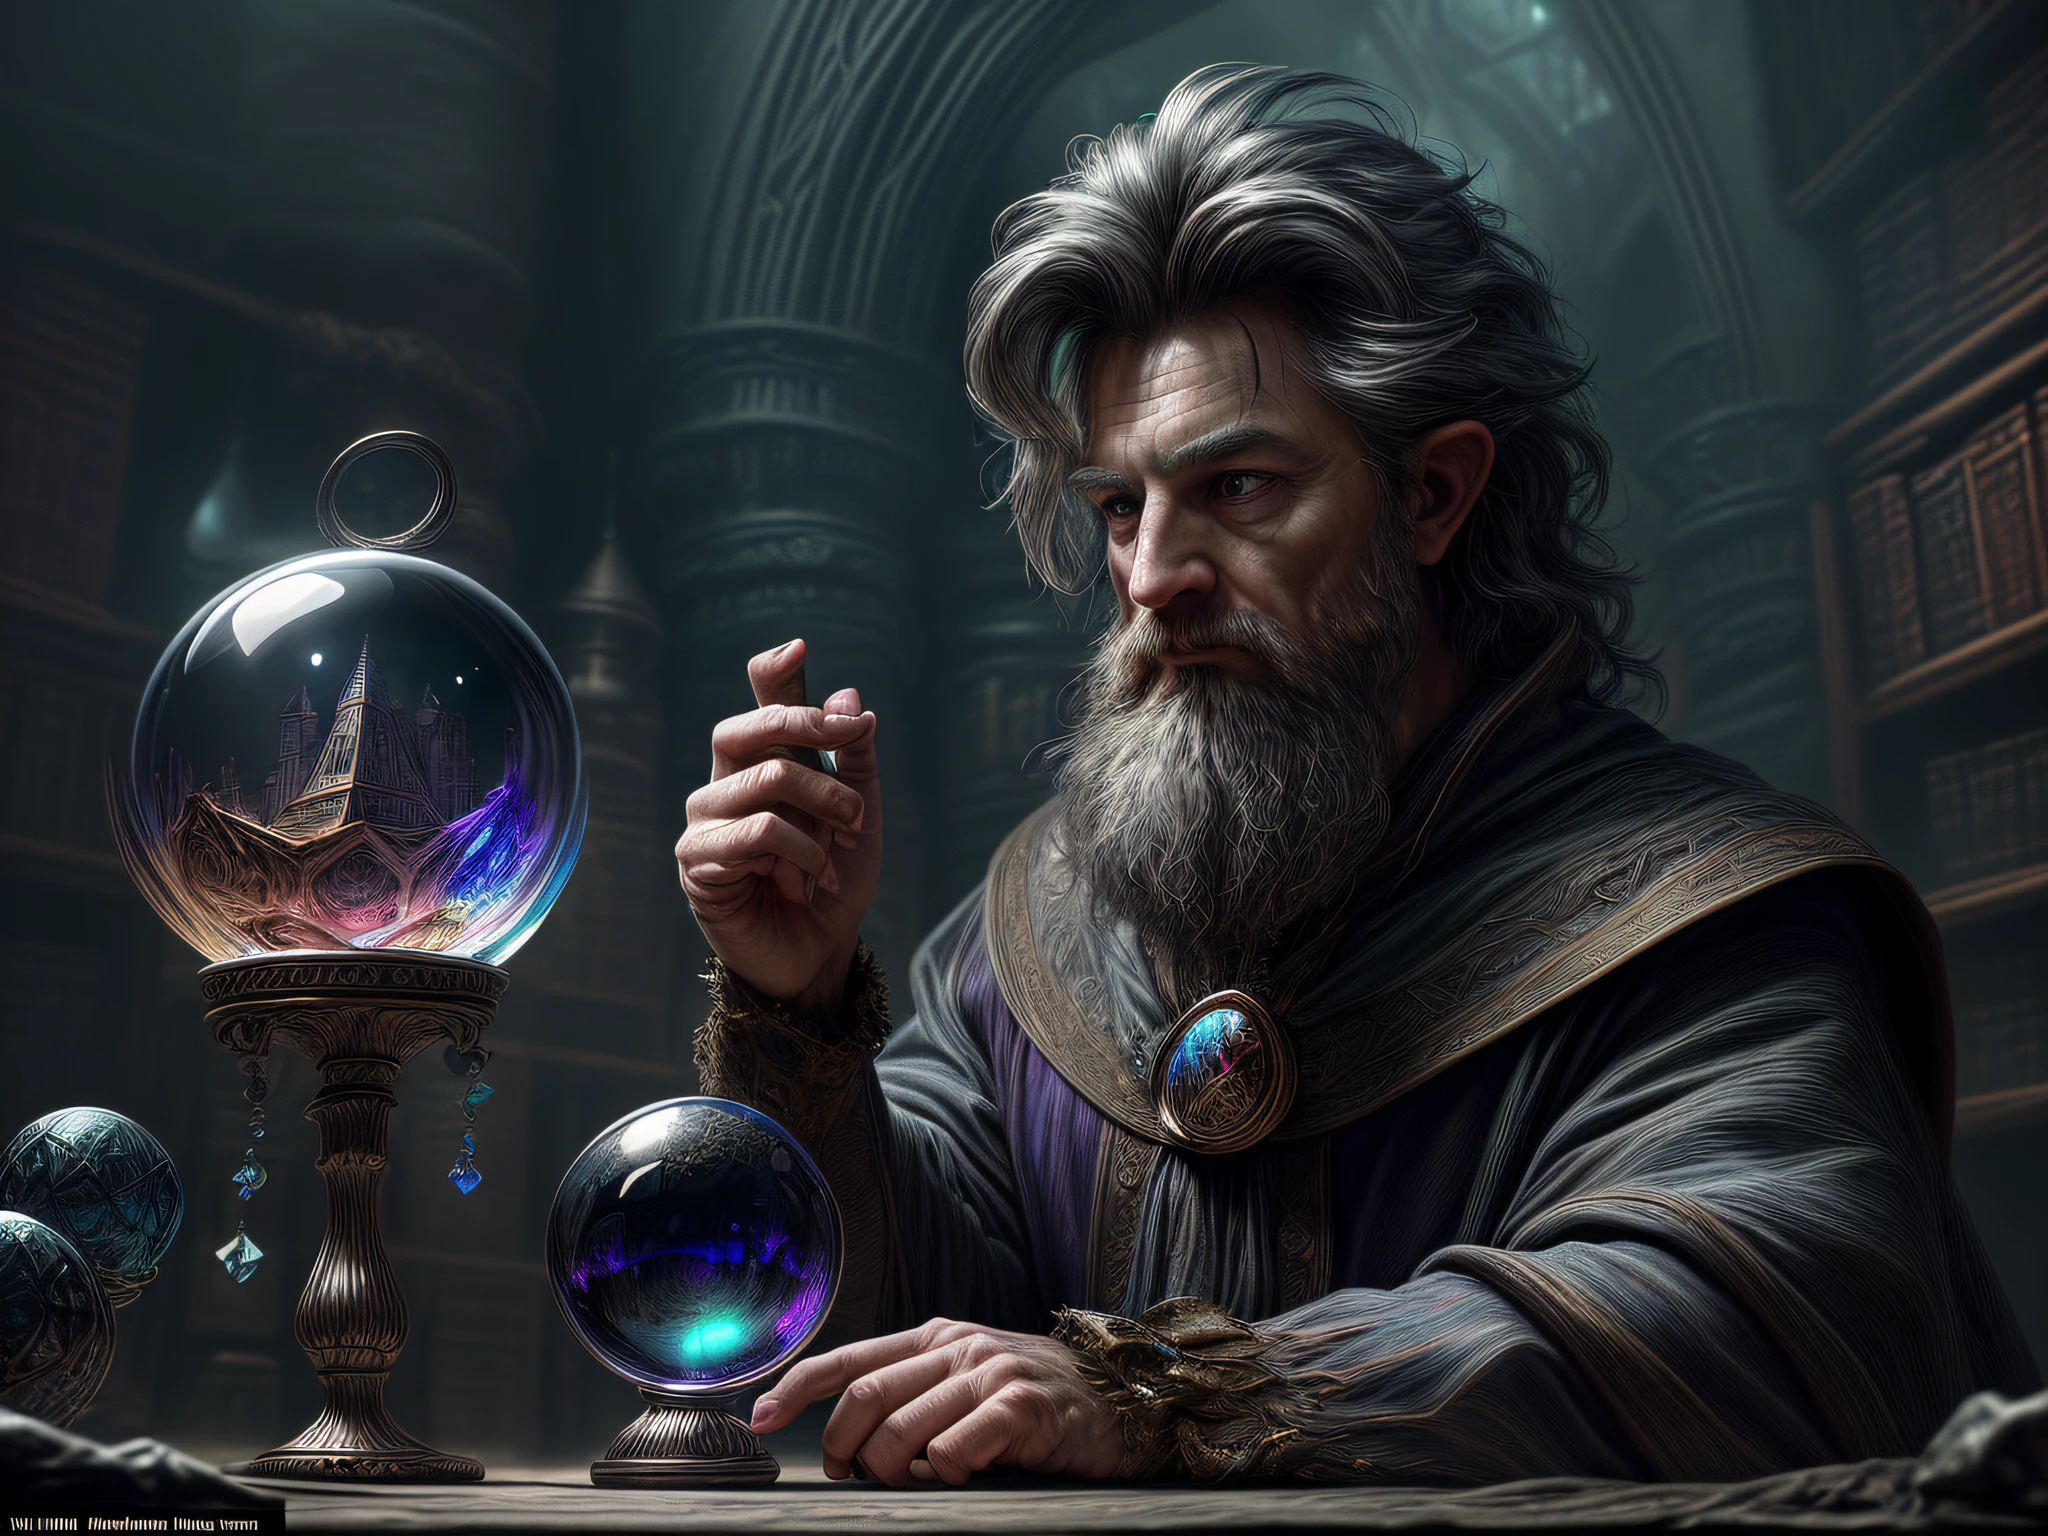 high details, best quality, 8k, [ultra detailed], masterpiece, best quality, (extremely detailed), dynamic angle, ultra wide shot, photorealistic, RAW, fantasy art, dnd art, fantasy art, realistic art, a wide angle view wallpaper of a wizard (intense details, Masterpiece, best quality: 1.5) looking into his crystal ball (intense details, Masterpiece, best quality: 1.5), [[an image of a cell phone in the crystal ball]] (intense details, Masterpiece, best quality: 1.5), human male wizard, fantasy wizard (intense details, Masterpiece, best quality: 1.5), D&D wizard, young human male (intense details, Masterpiece, best quality: 1.5), [[anatomically correct]], dynamic hair, dynamic eyes, wearing magical robe (intense details, Masterpiece, best quality: 1.5), dynamic colors, ultra detailed face (intense details, Masterpiece, best quality: 1.5), in his laboratory (intense details, Masterpiece, best quality: 1.5), many magical tomes, magical library (intense details, Masterpiece, best quality: 1.5), many magical vials, ultra wide angle from a medium distance